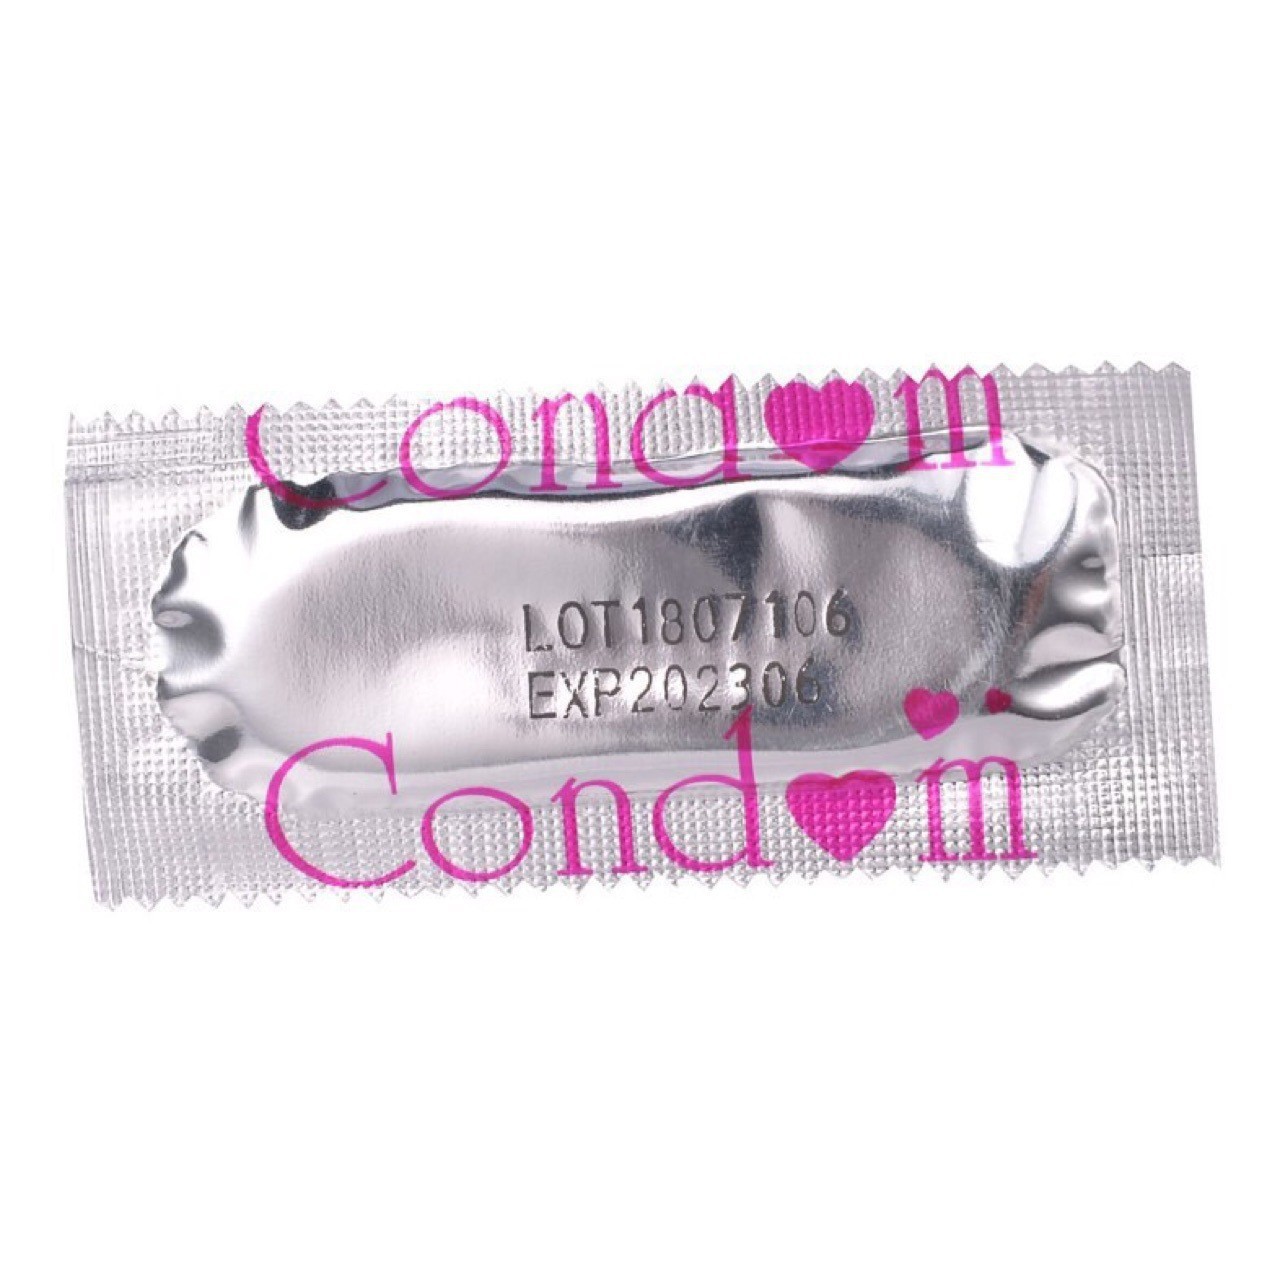 Foreign Trade Export Spot Condom English Version Long Wallet Low Price Hyaluronic Acid Ultra-Thin Large Oil Taobao Gift Set